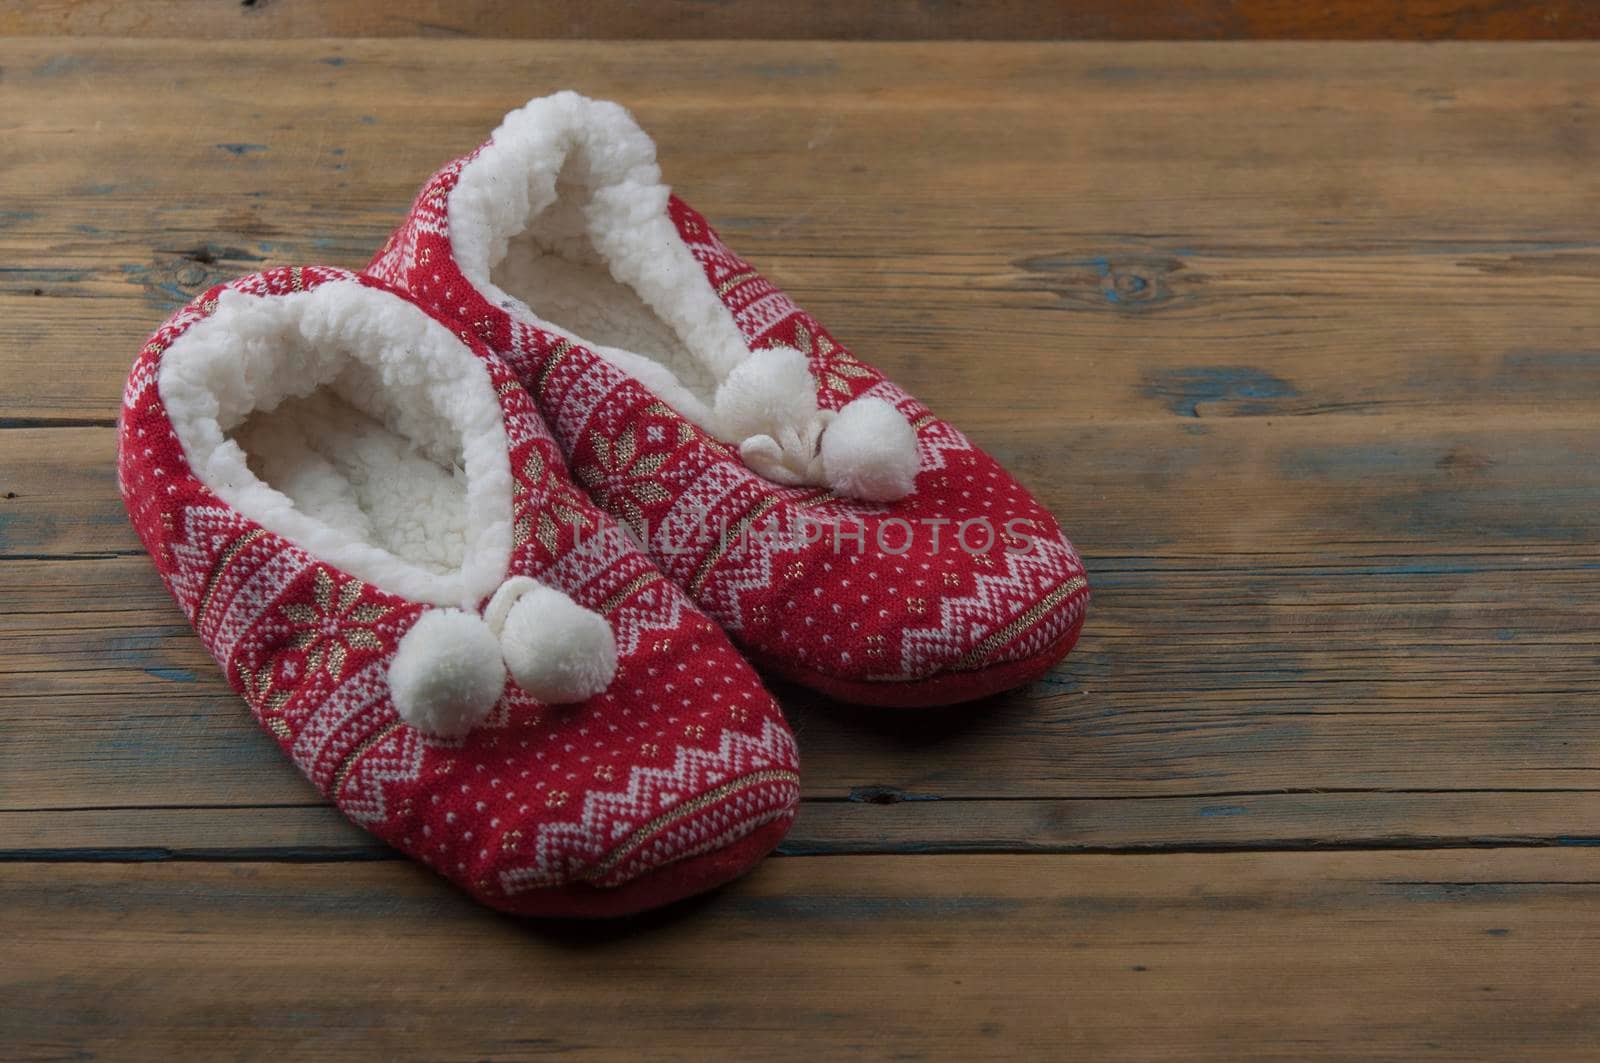 Slippers on the wood floor. Soft comfortable home slippers